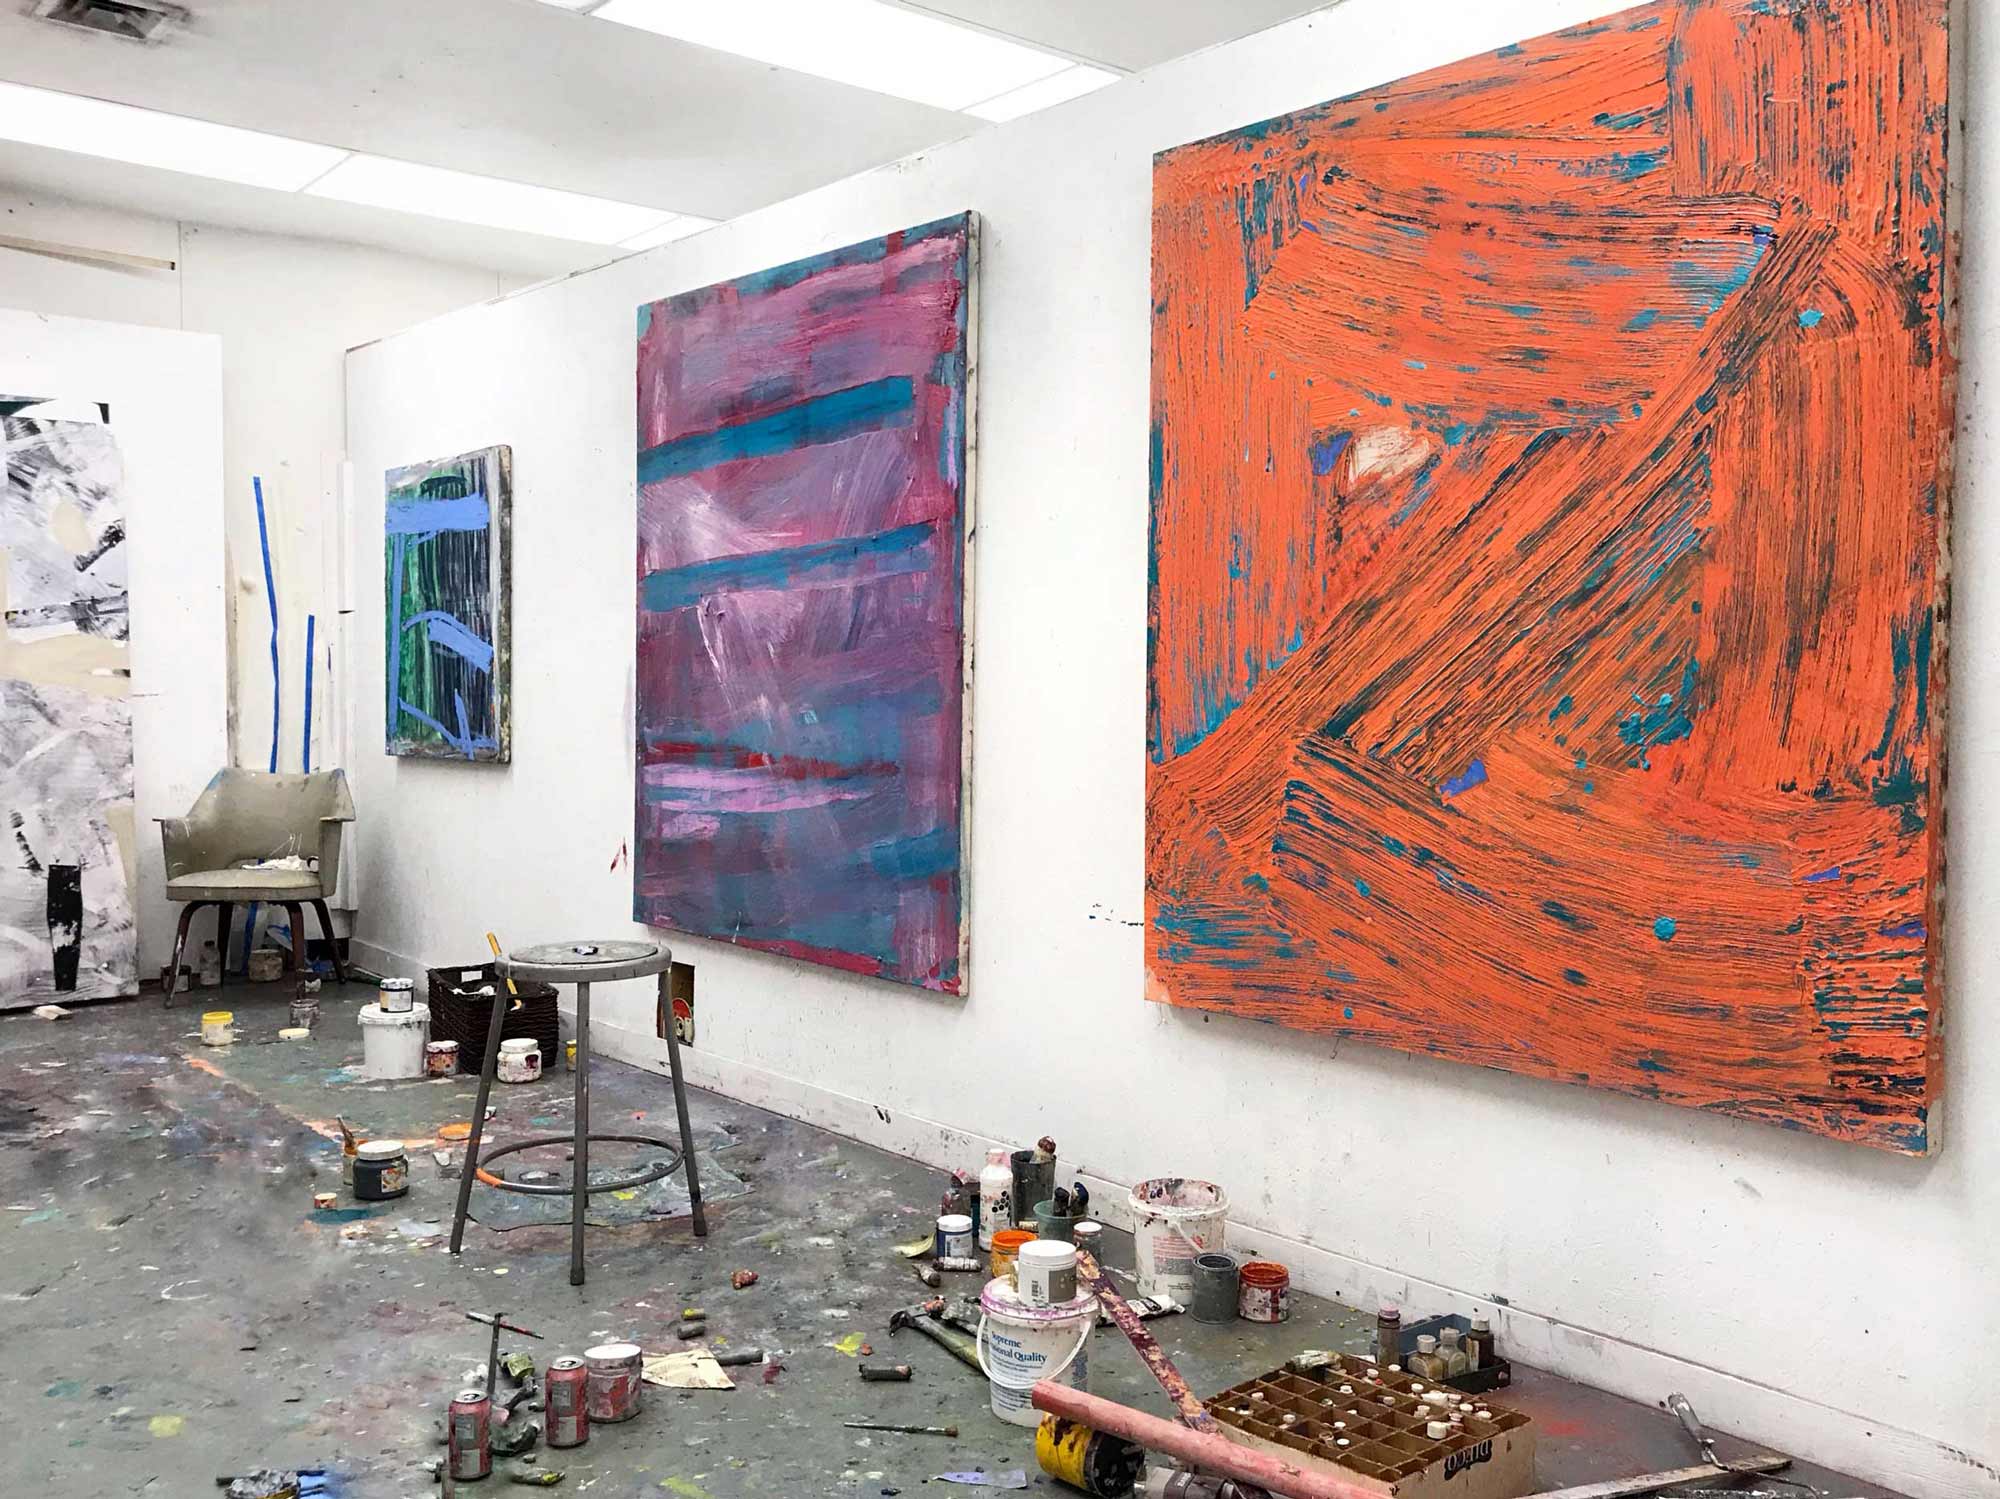 Studio view of large scale works, 2019, Tampa, FL